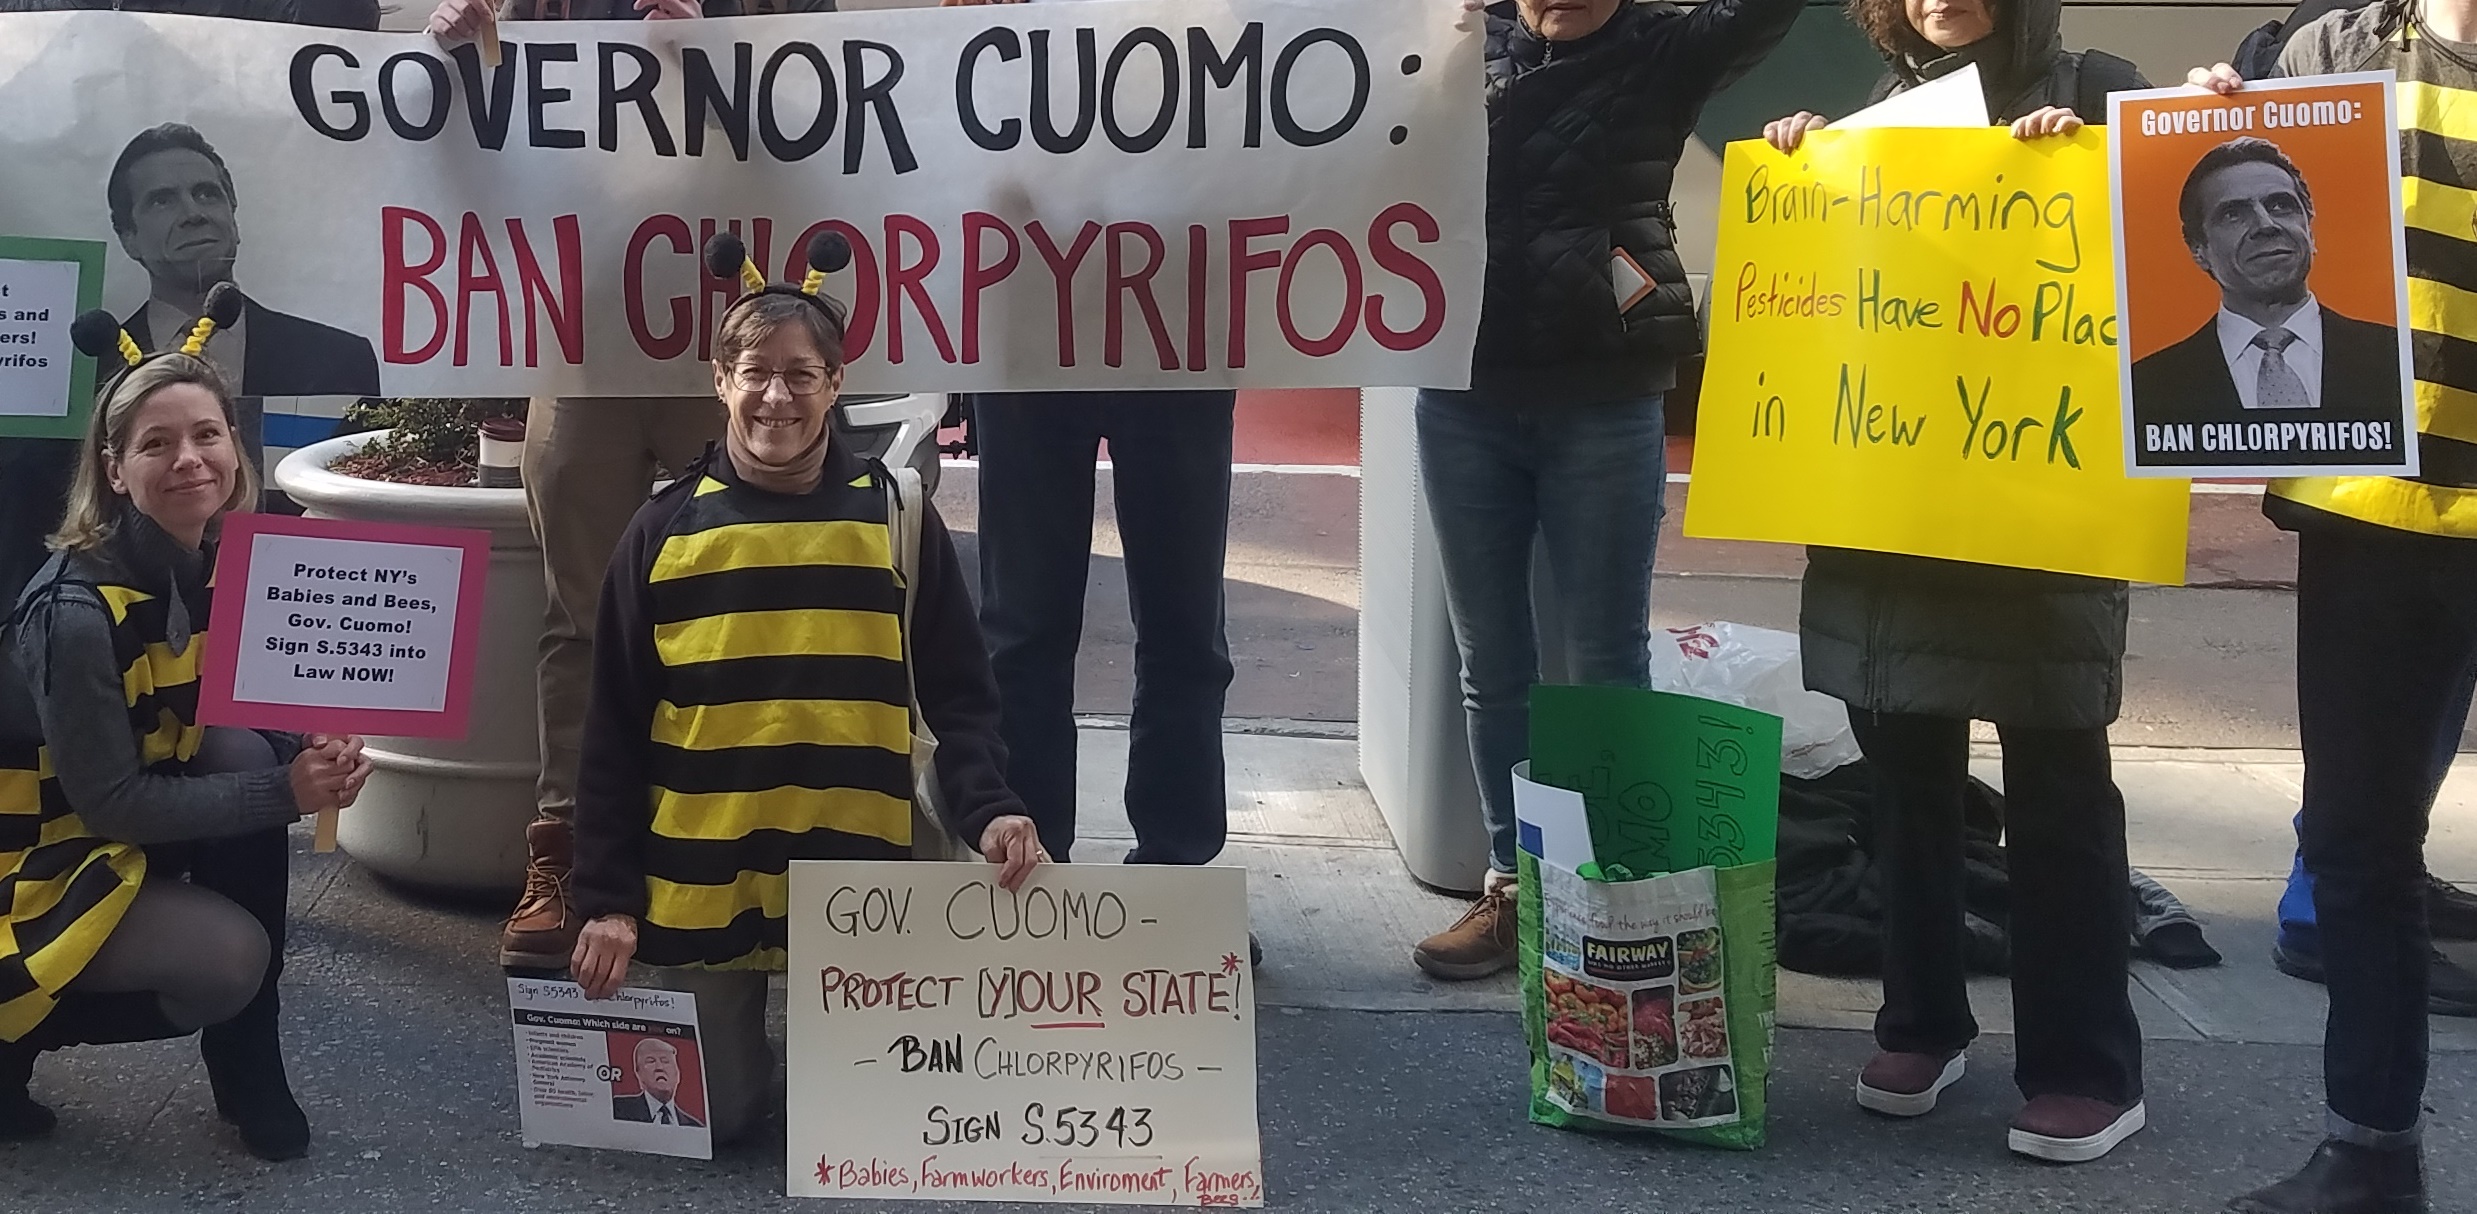 Participants of the New York Cuomo Chlorpyrifos rally pose with signs during the event.